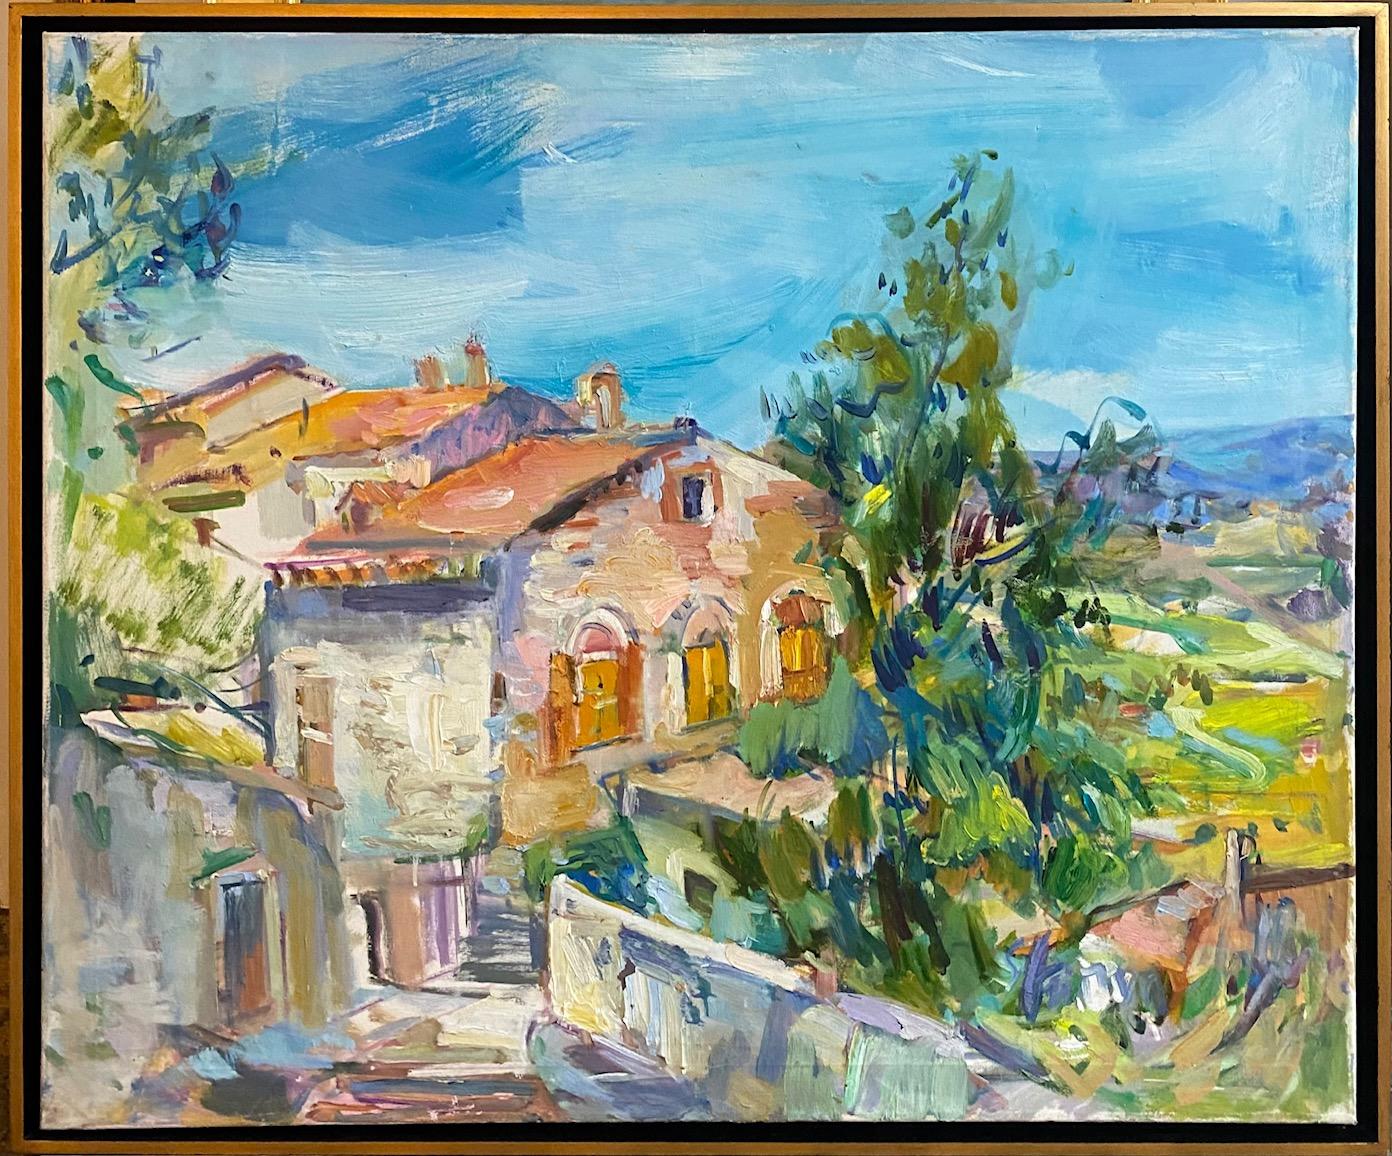 Abstract Painting Sonia Grineva - Todi, Ombrie, paysage italien expressionniste abstrait original 30x36